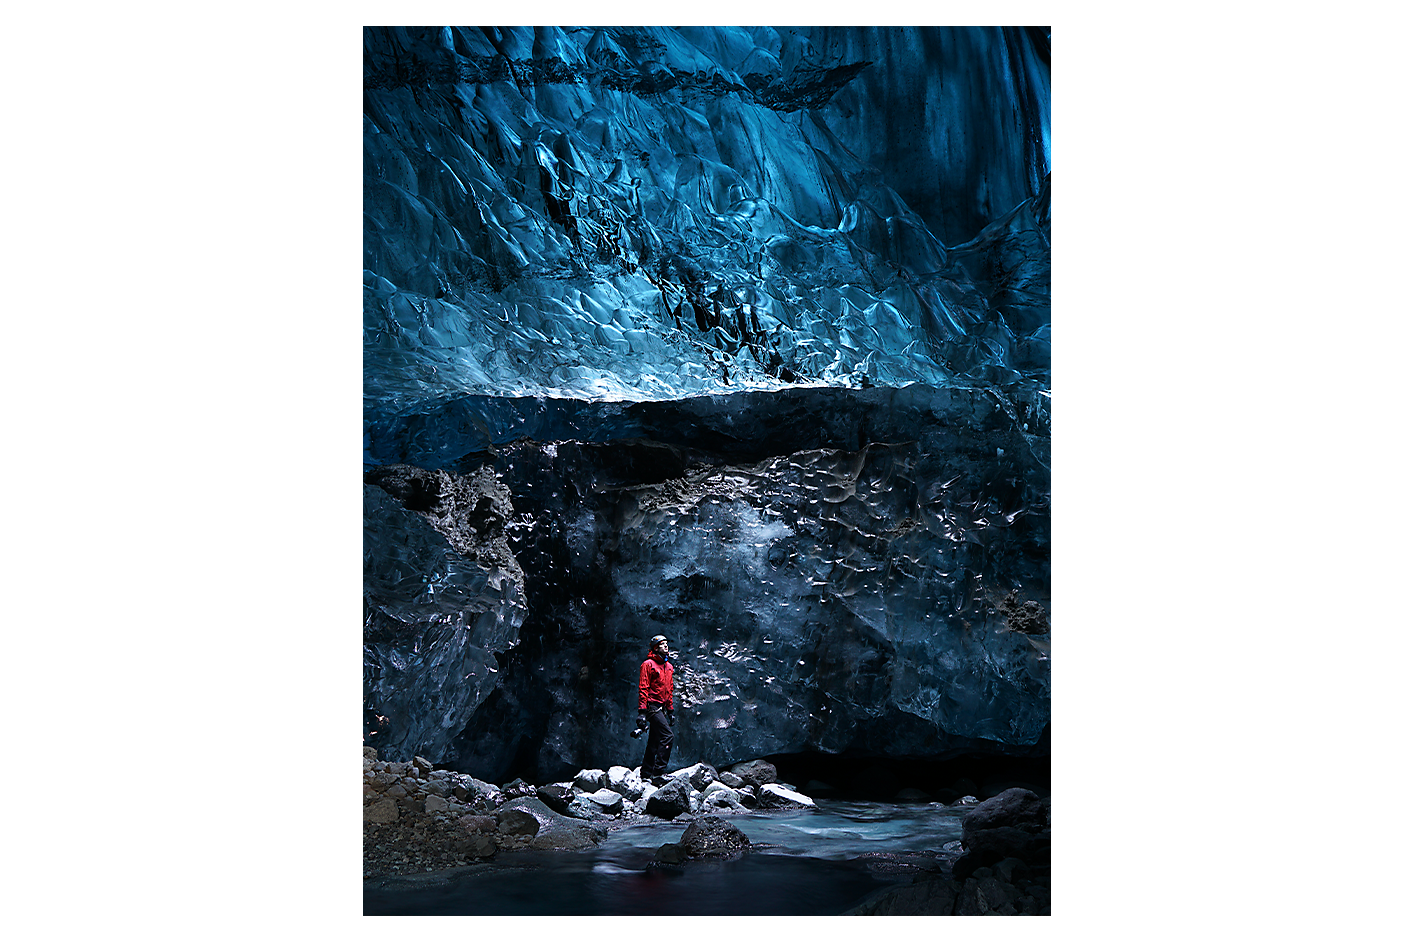 Sample image of a man in an ice cave